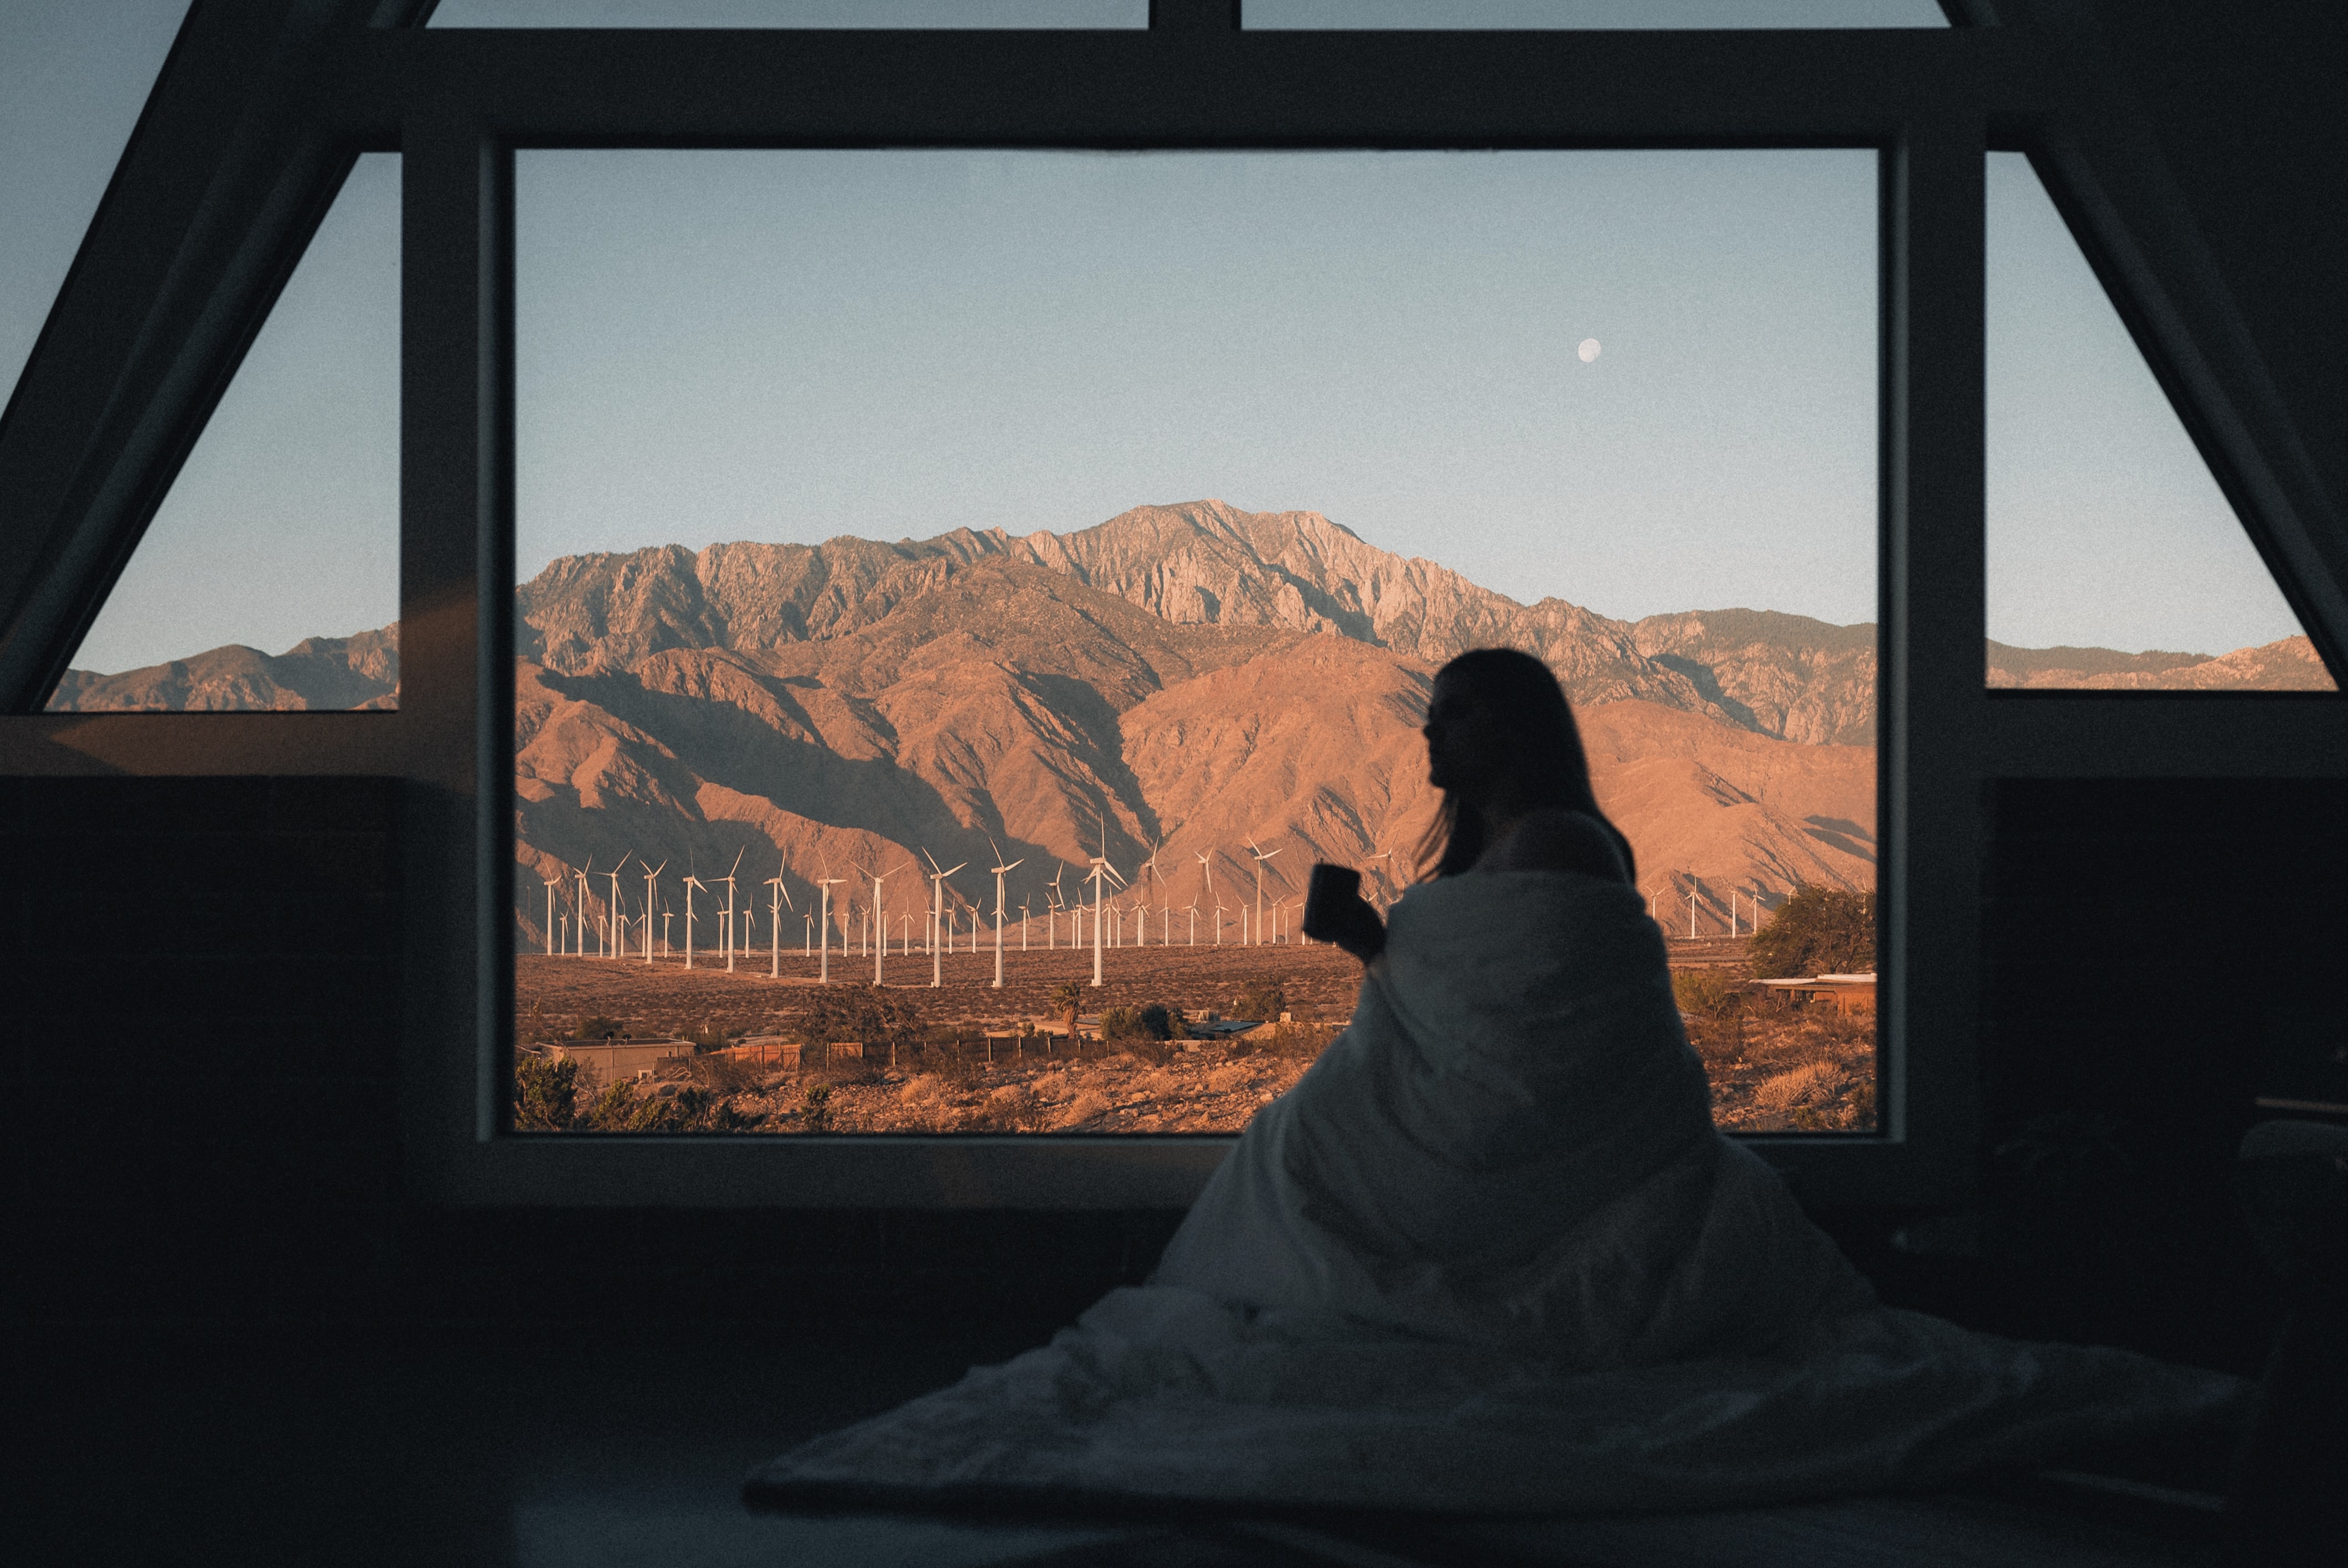 An Airbnb overlooking a wind farm in the desert.